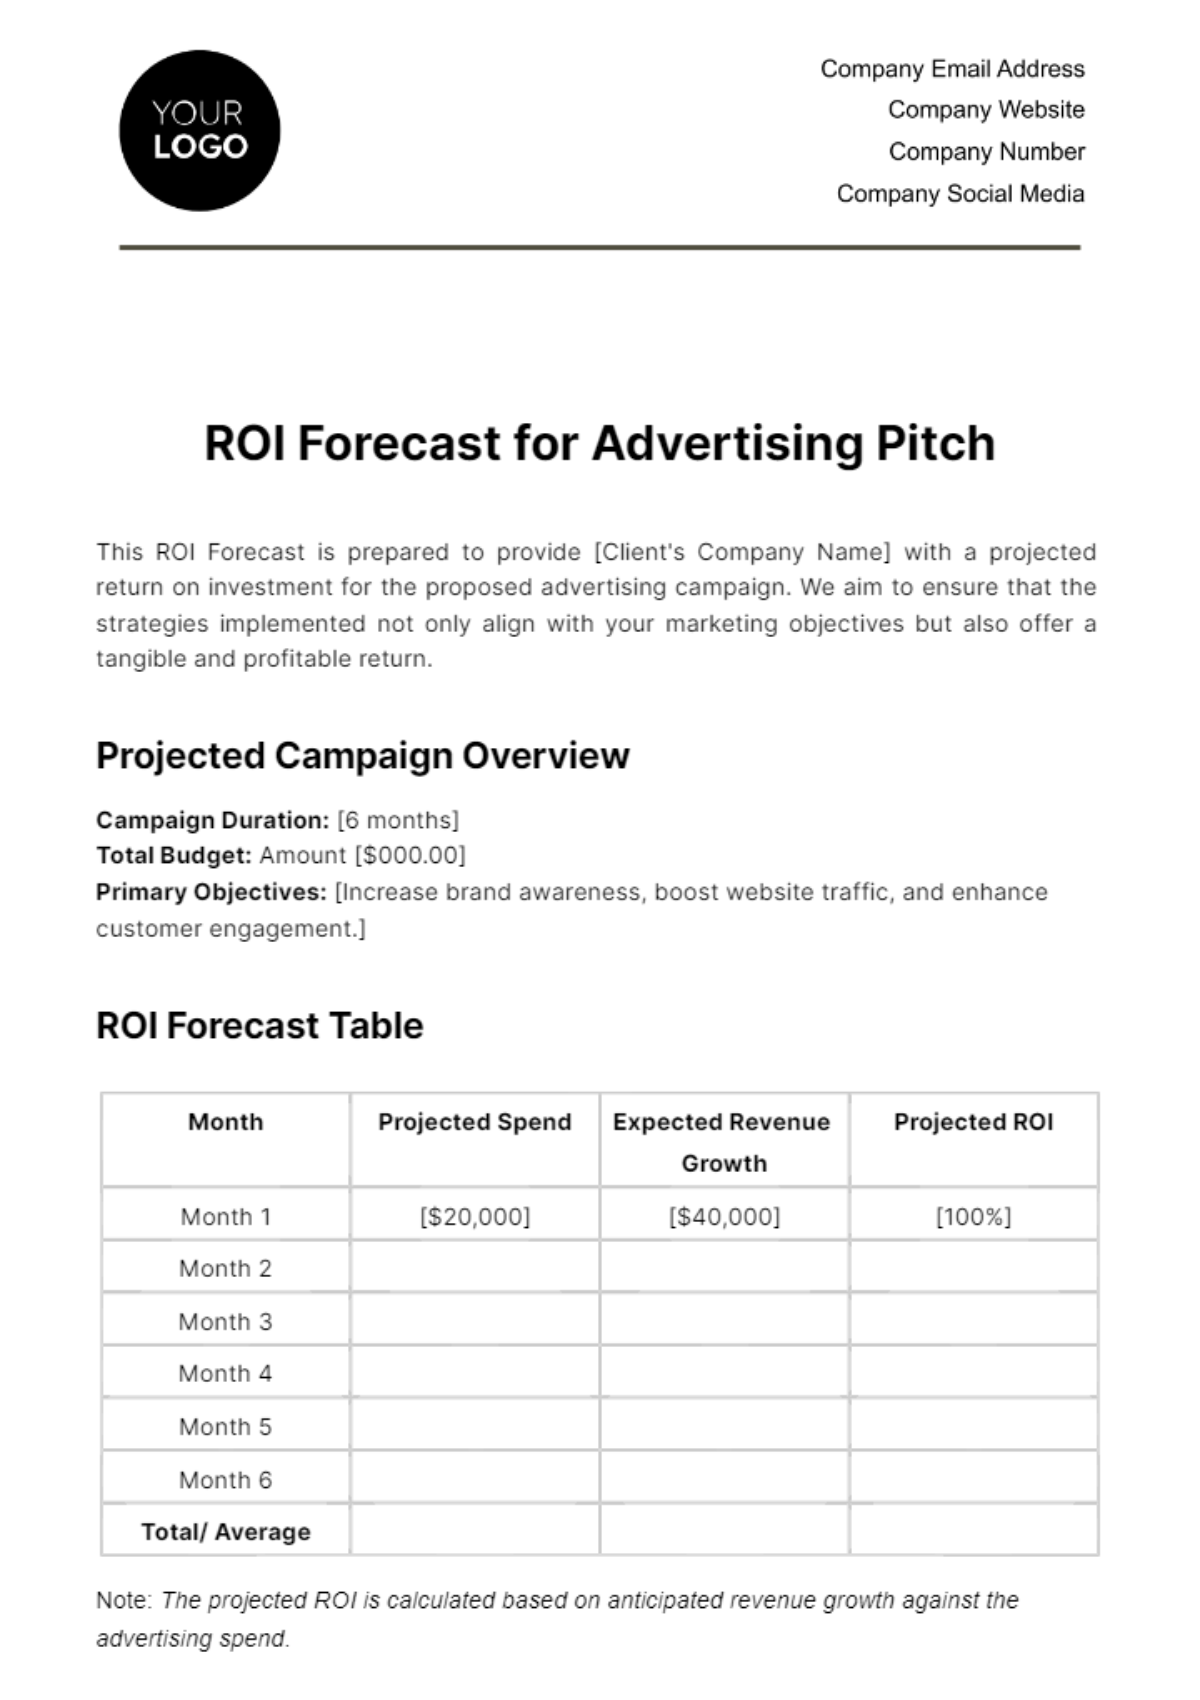 Free ROI Forecast for Advertising Pitch Template